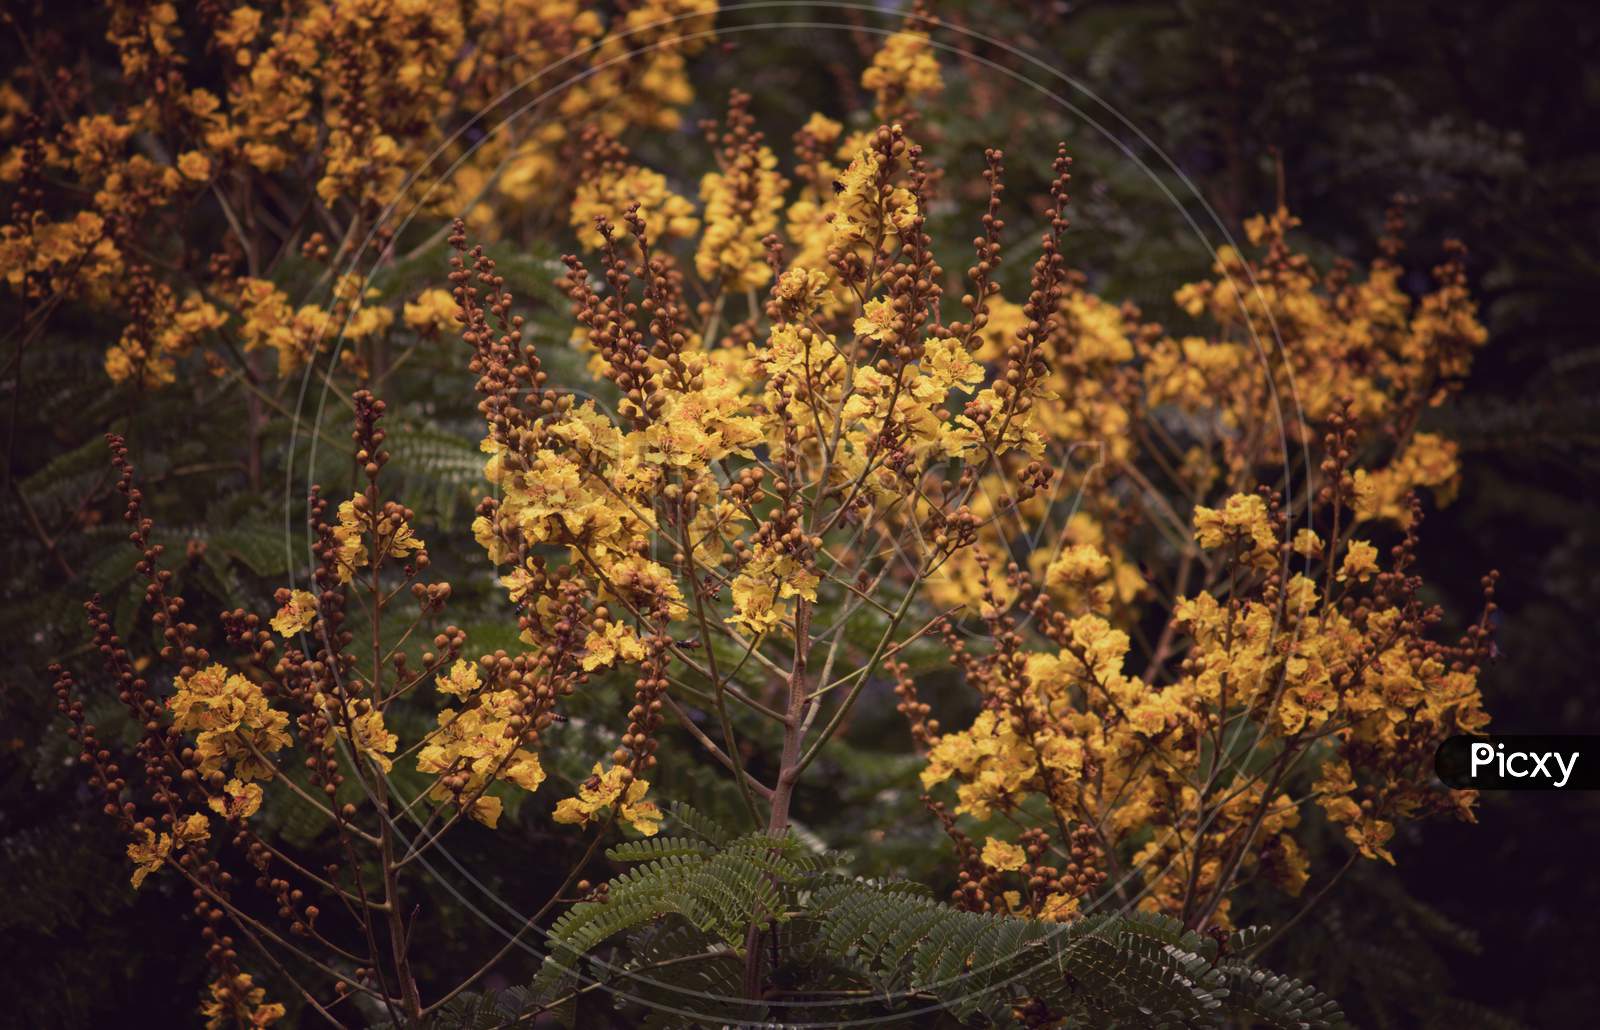 Yellow Flamboyant Or Copperpod Flower Clusters With Selective Focus